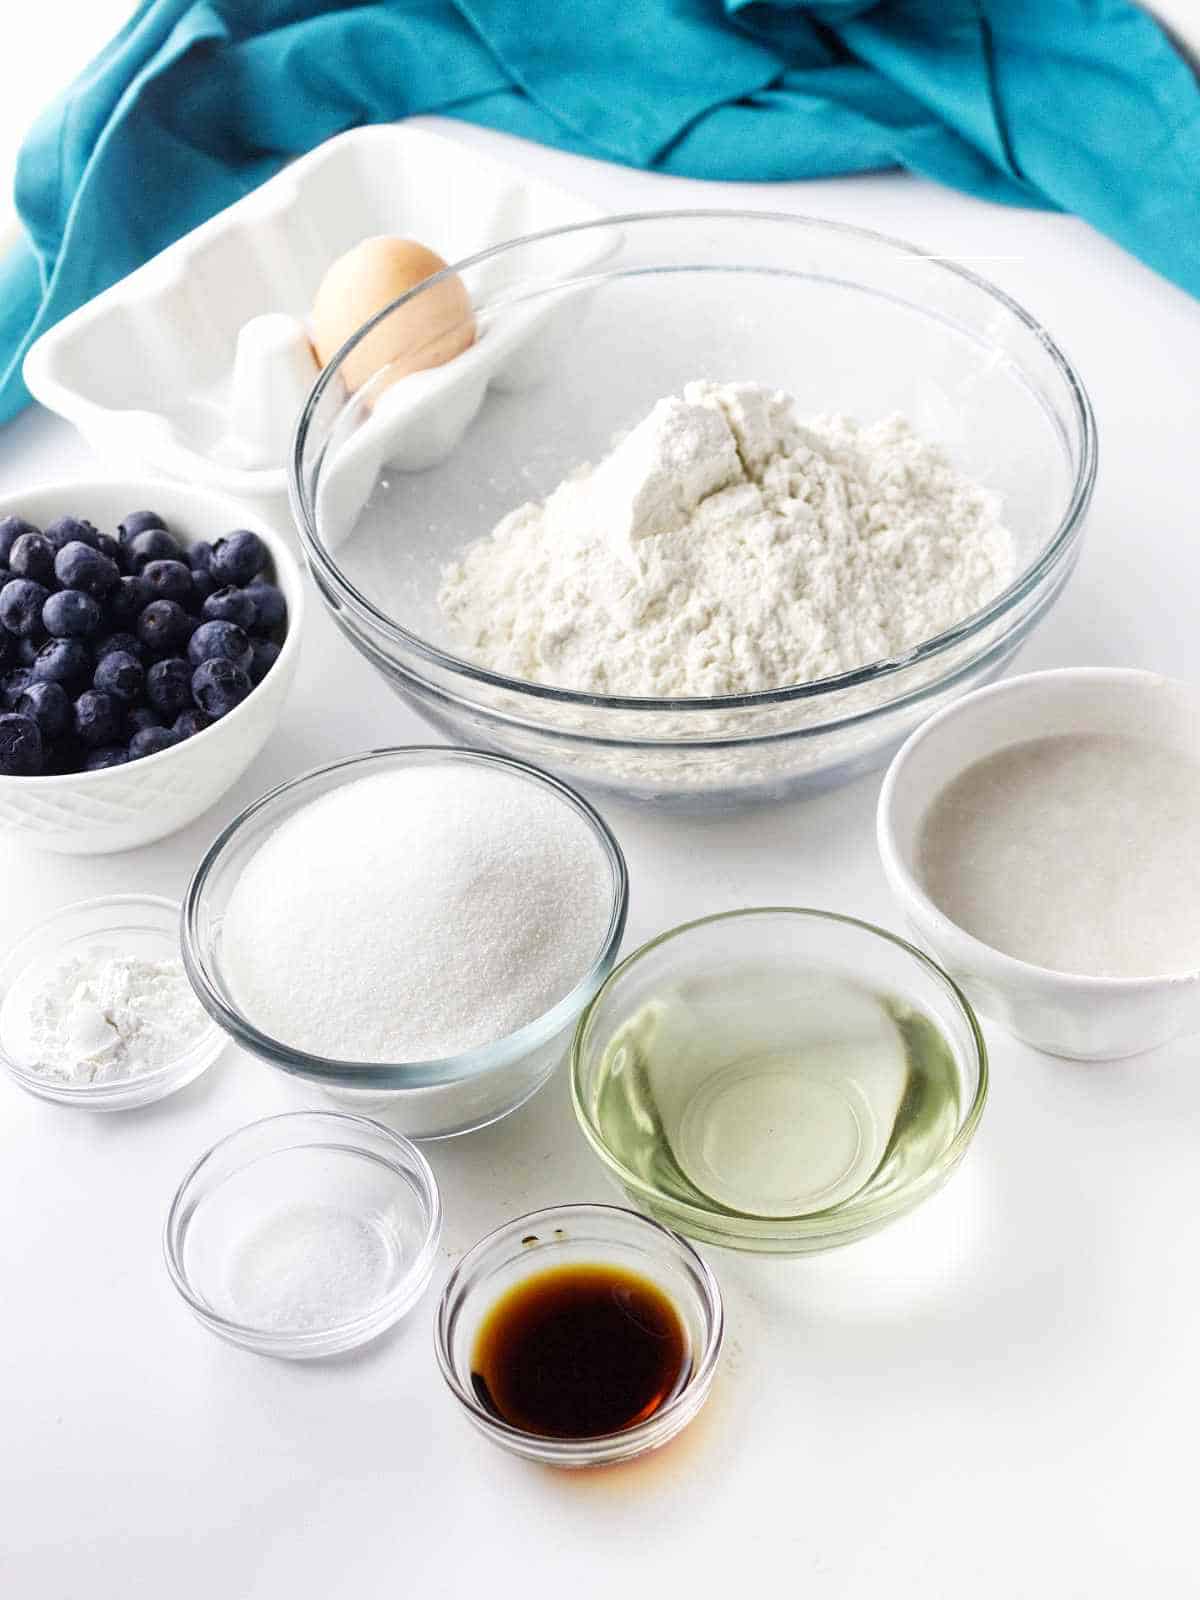 ingredients for blueberry muffins.